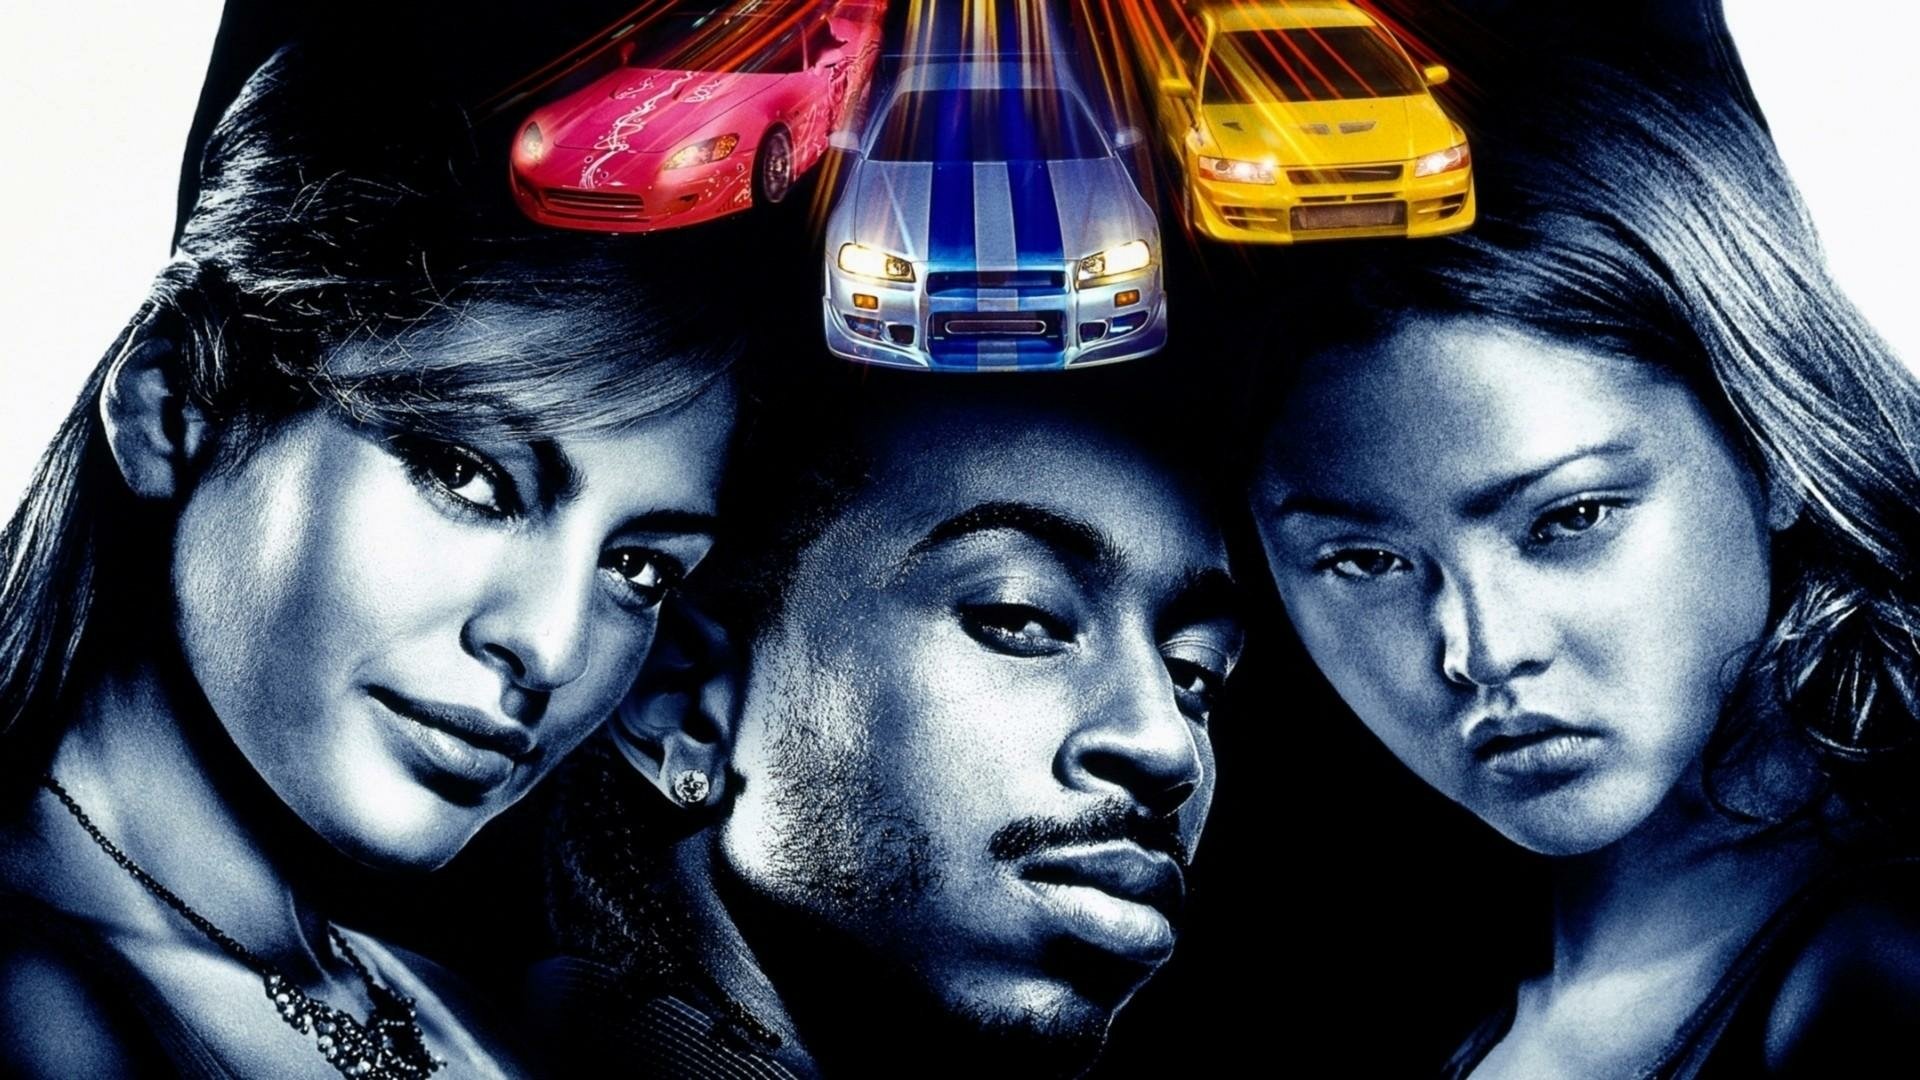 2 fast 2 furious download